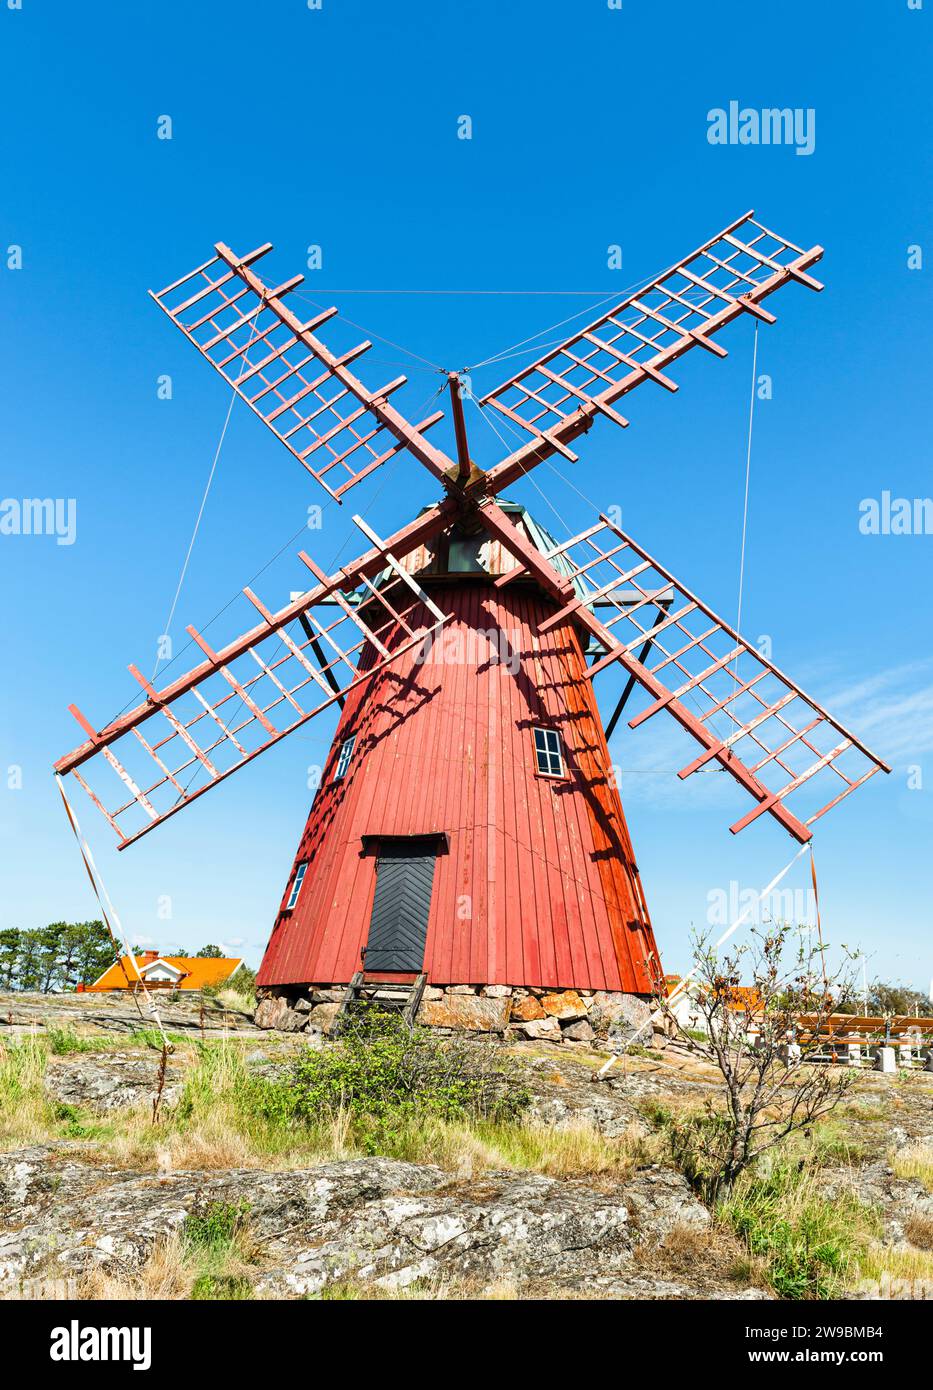 Historic red windmill in Mollösund on the island of Orust in the archipelago of the Swedish west coast Stock Photo